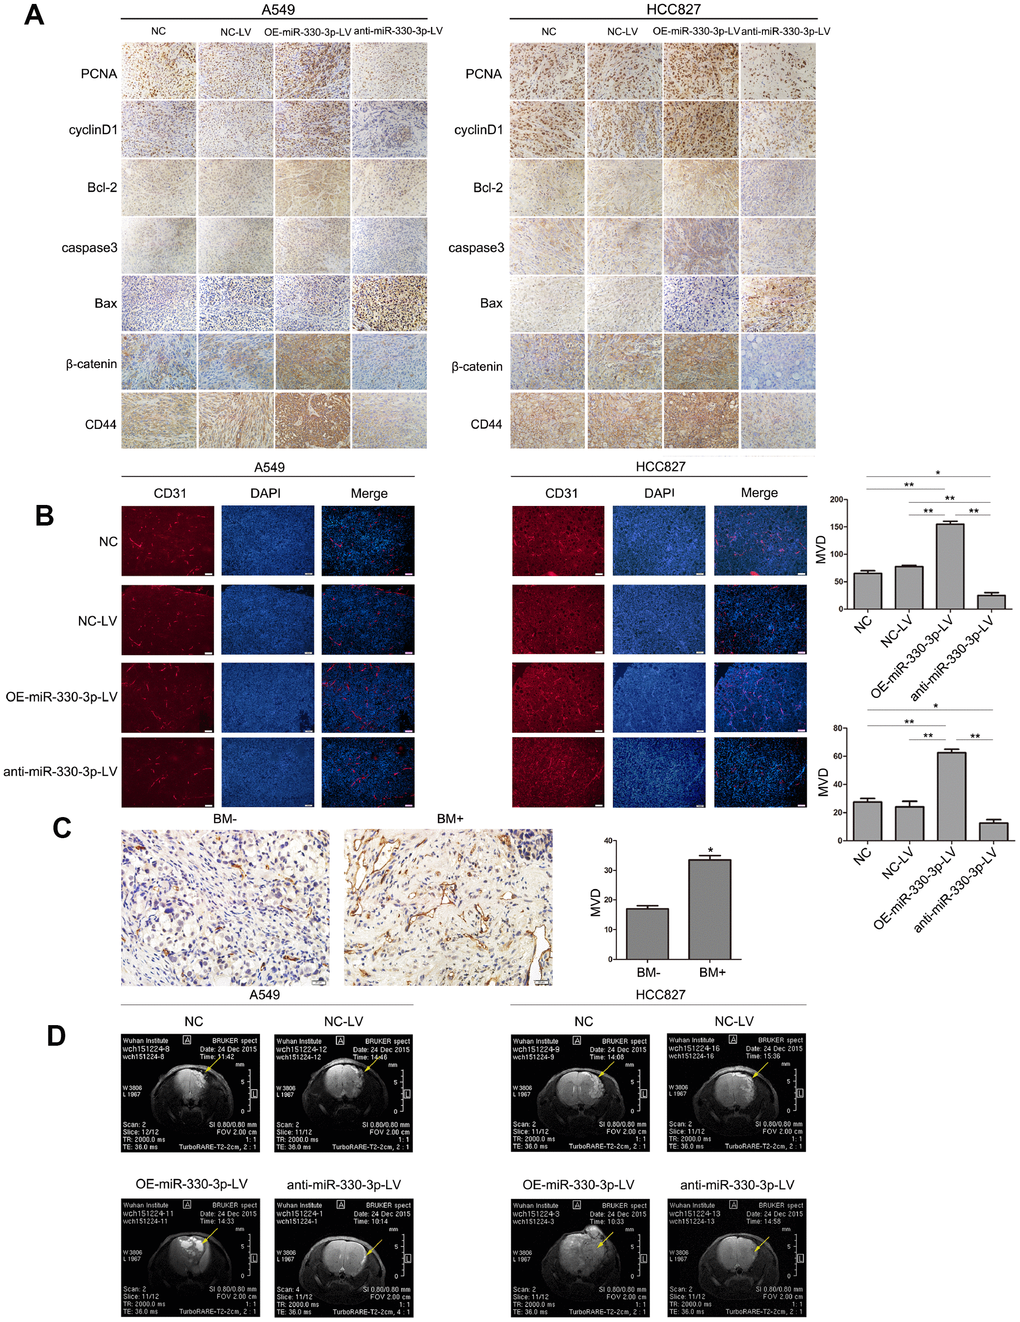 MiR-330-3p induces tumor metastasis and angiogenesis in BM model. (A) Immunohistochemical analysis of PCNA, cylinD1, Bcl-2, caspase3, Bax, CD44 and β-catenin expression in tissue sections of GFP-labeled tumors isolated from mice injected with A549 and HCC827 cells transfected with NC-LV, OE-miR-330-3p-LV or anti-miR-330-3p-LV. (B, C) Representative images of CD31-positive endothelial cells in tumor tissues of mice (B) and NSCLC patients (C). *P P D) MRI images of metastatic tumors in the brain. Representative MRI of tumors is shown. A representative experiment of three was reported.